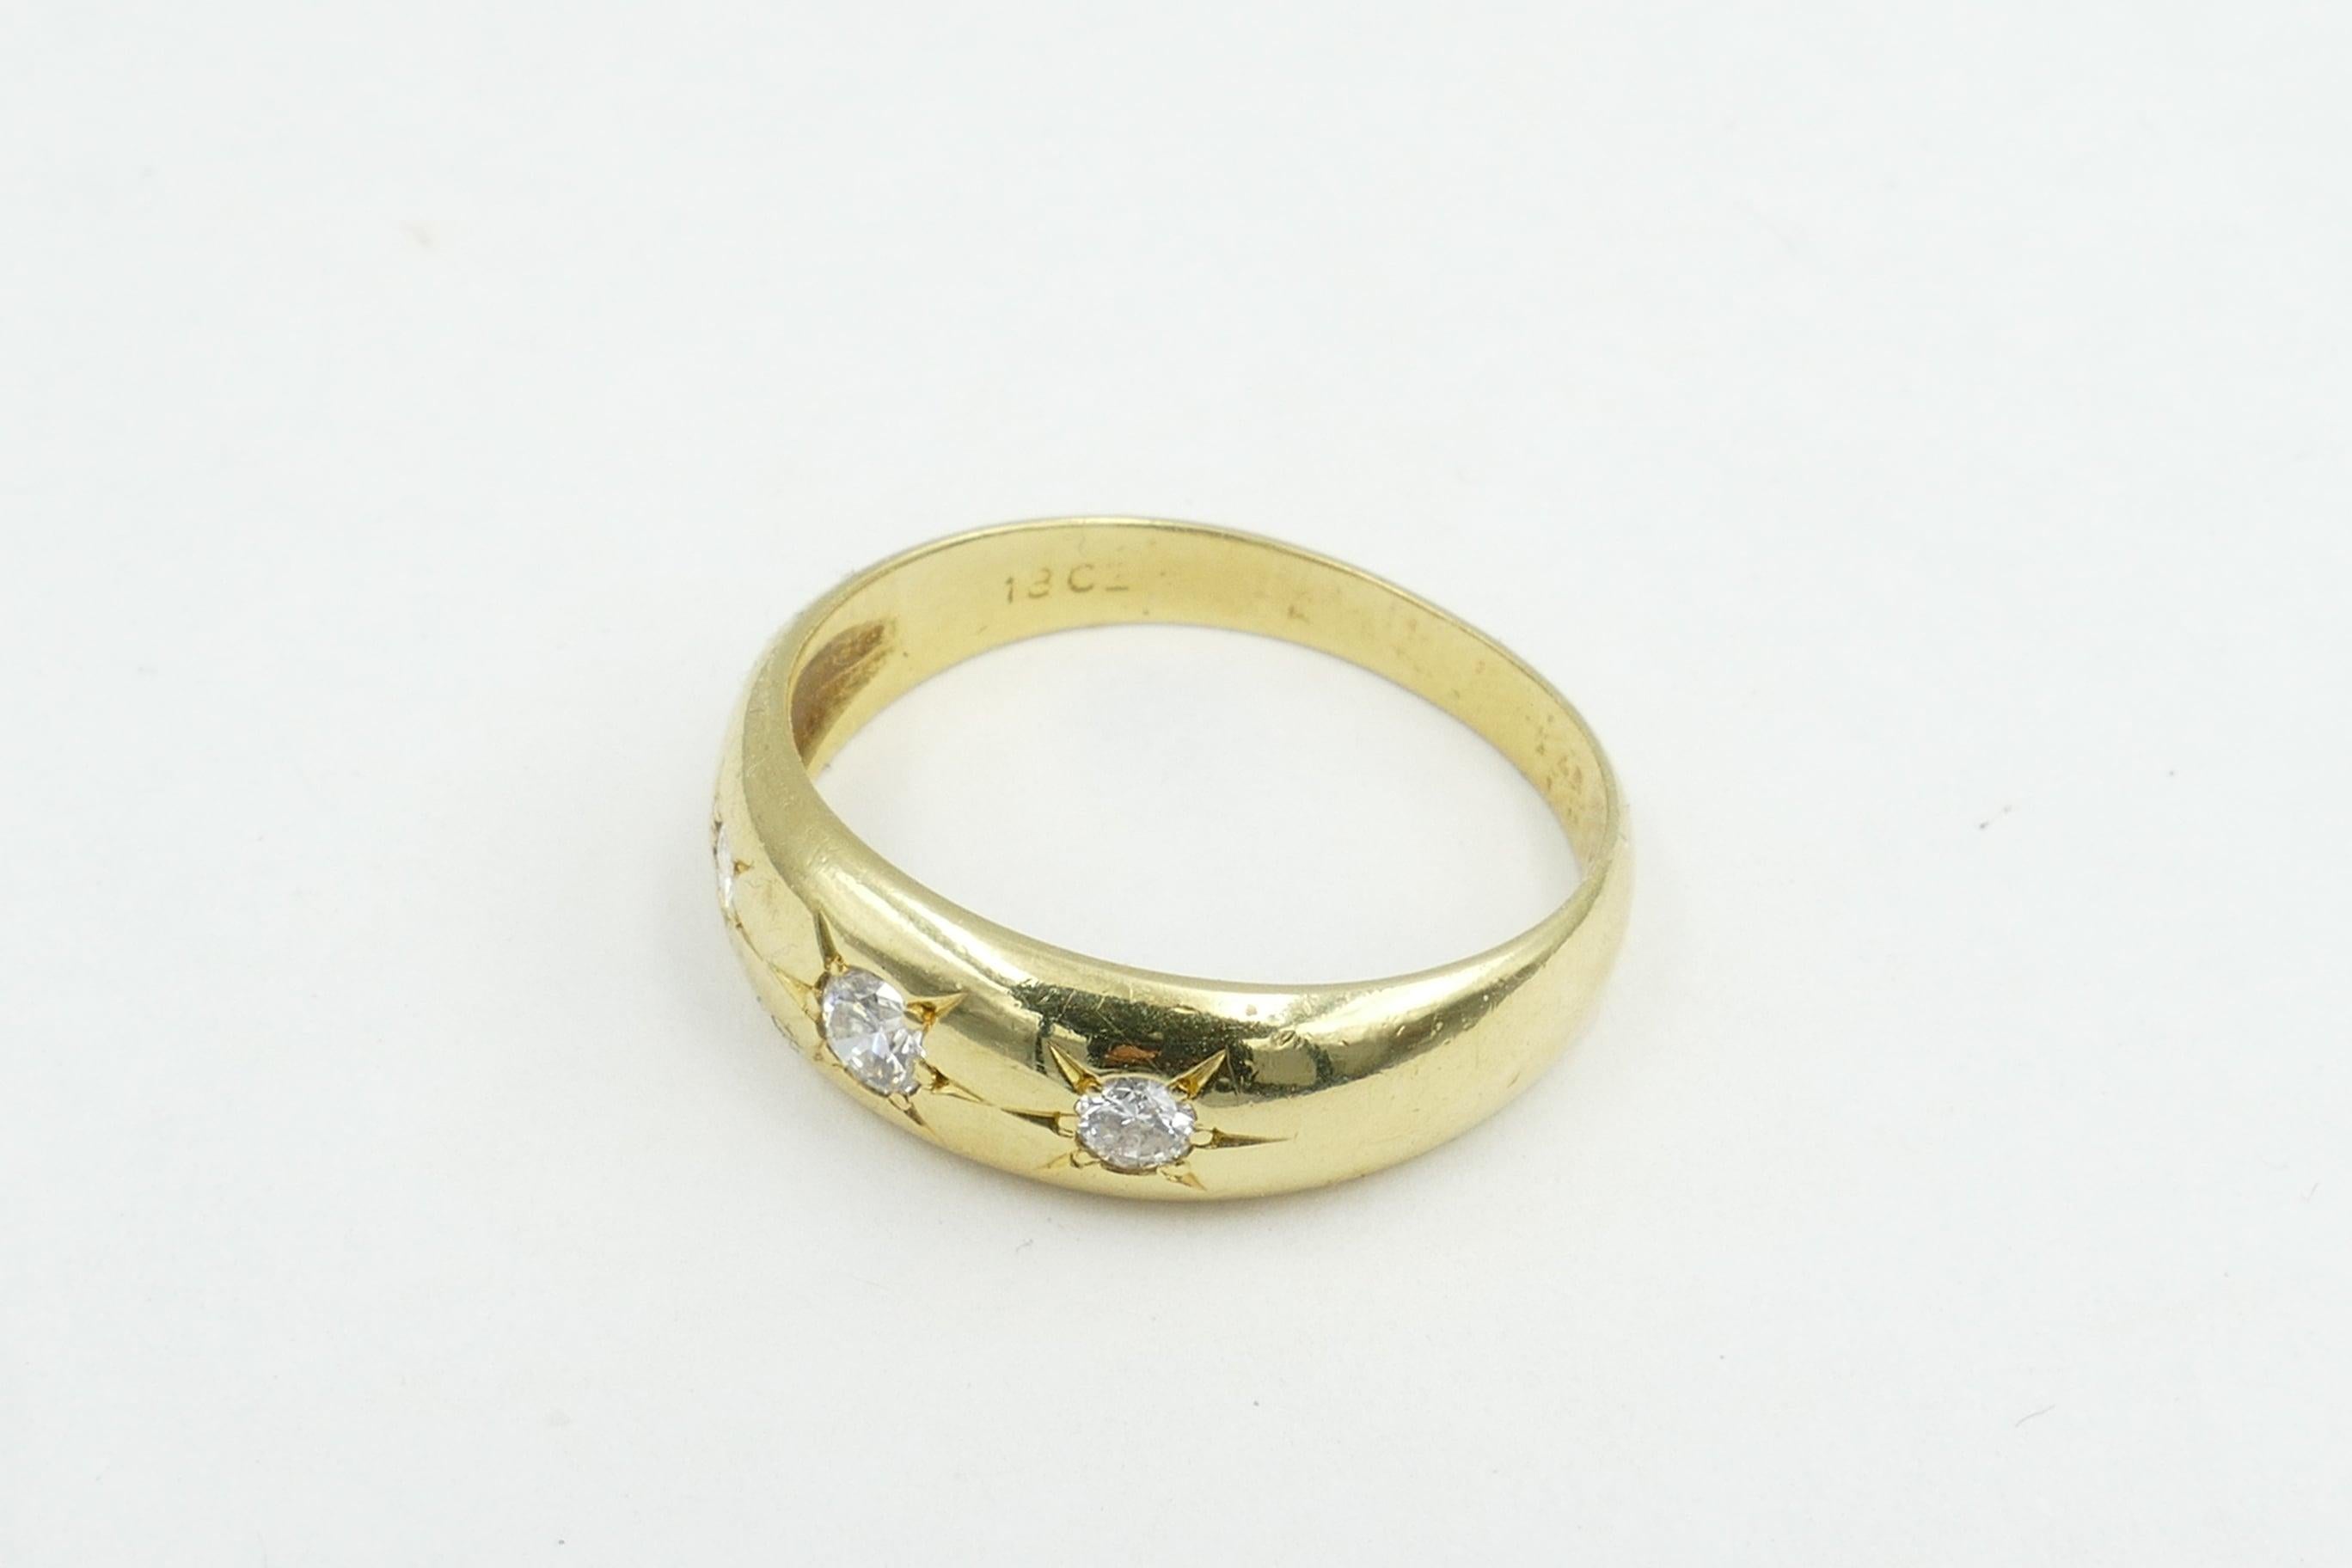 This very lovely old Gypsy Ring set in yellow Gold features 3 high level Diamonds.
The  Colour is F-G & Clarity VS2 - SI1. The Diamond total weight is 0.22cts but they twinkle very brightly.
The Band is polished, half round, reverse tapered to a